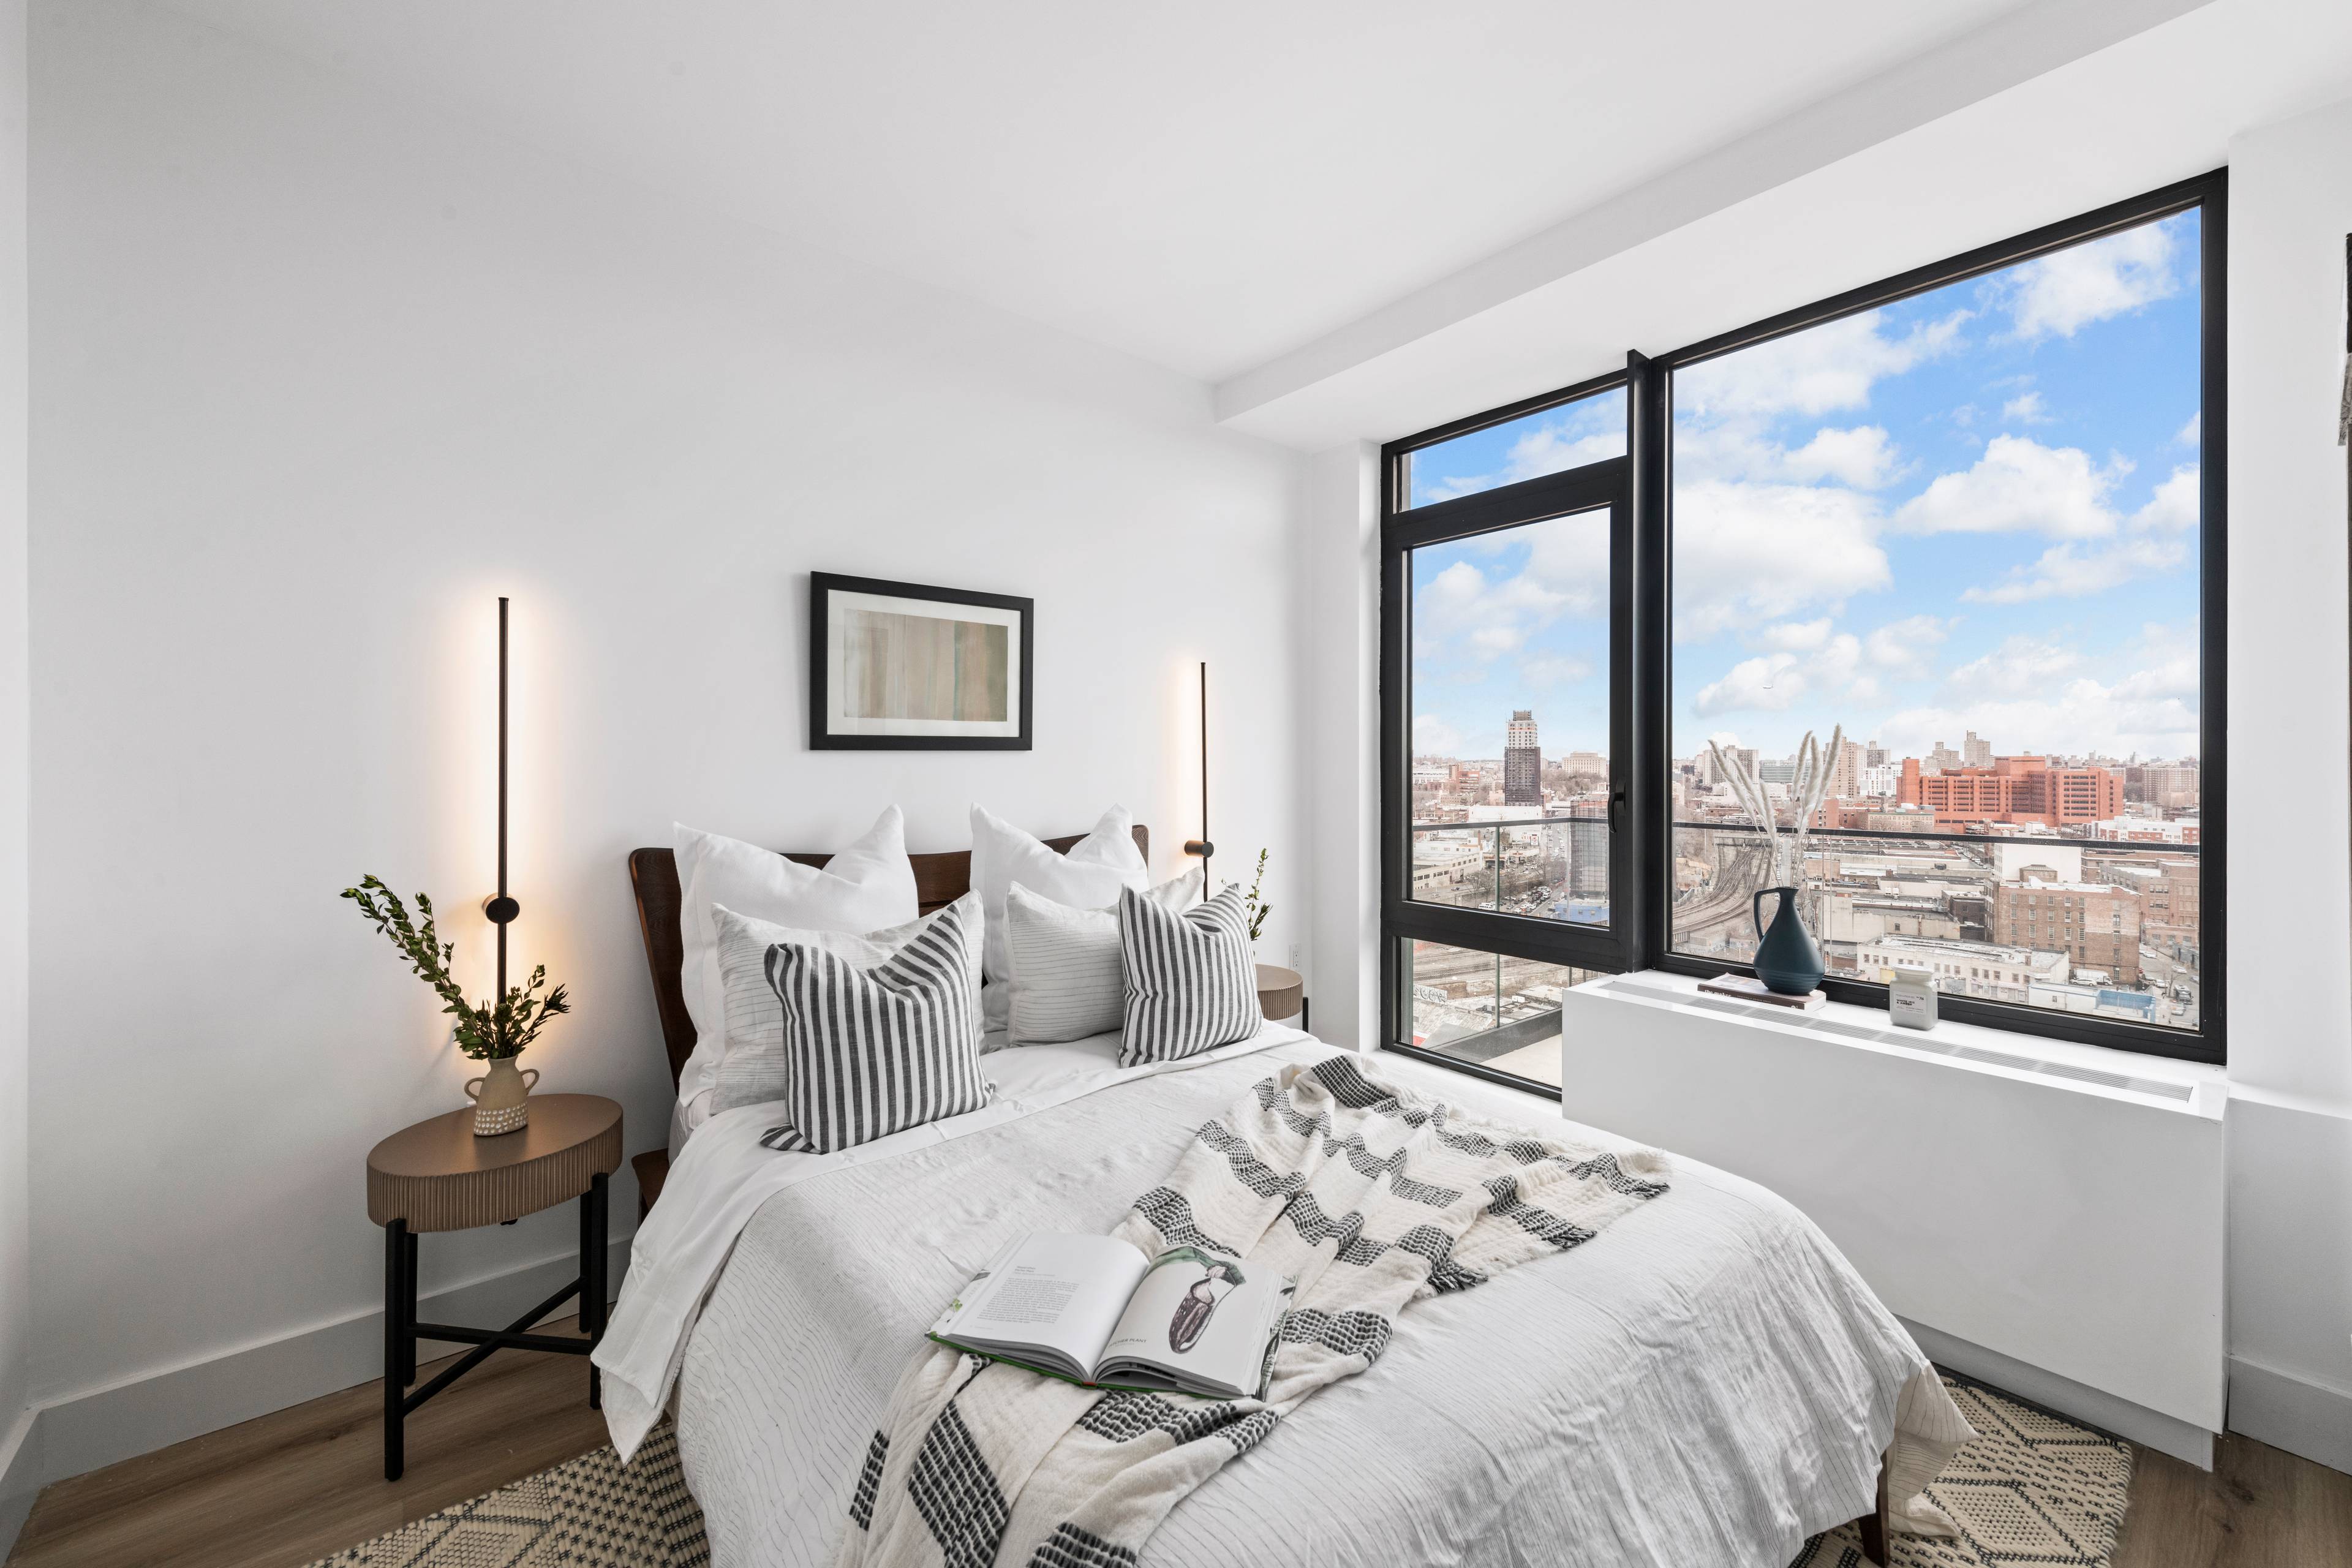 BRAND NEW, LUXURY 1 BEDROOM RENTAL AT THE ARCHES +NYC